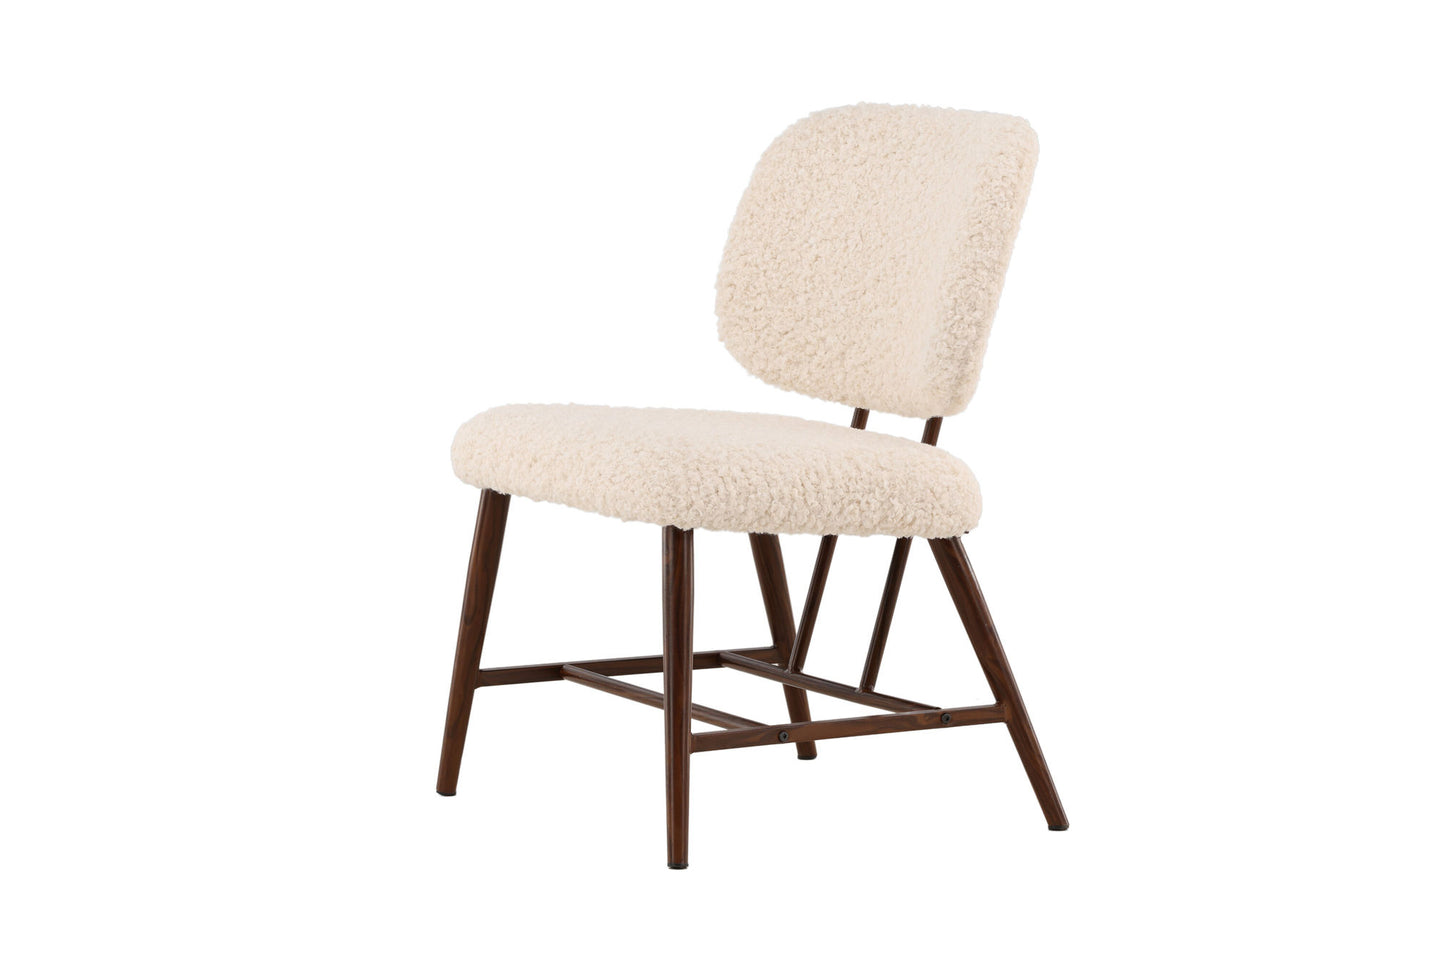 Midland fauteuil creme wit teddy